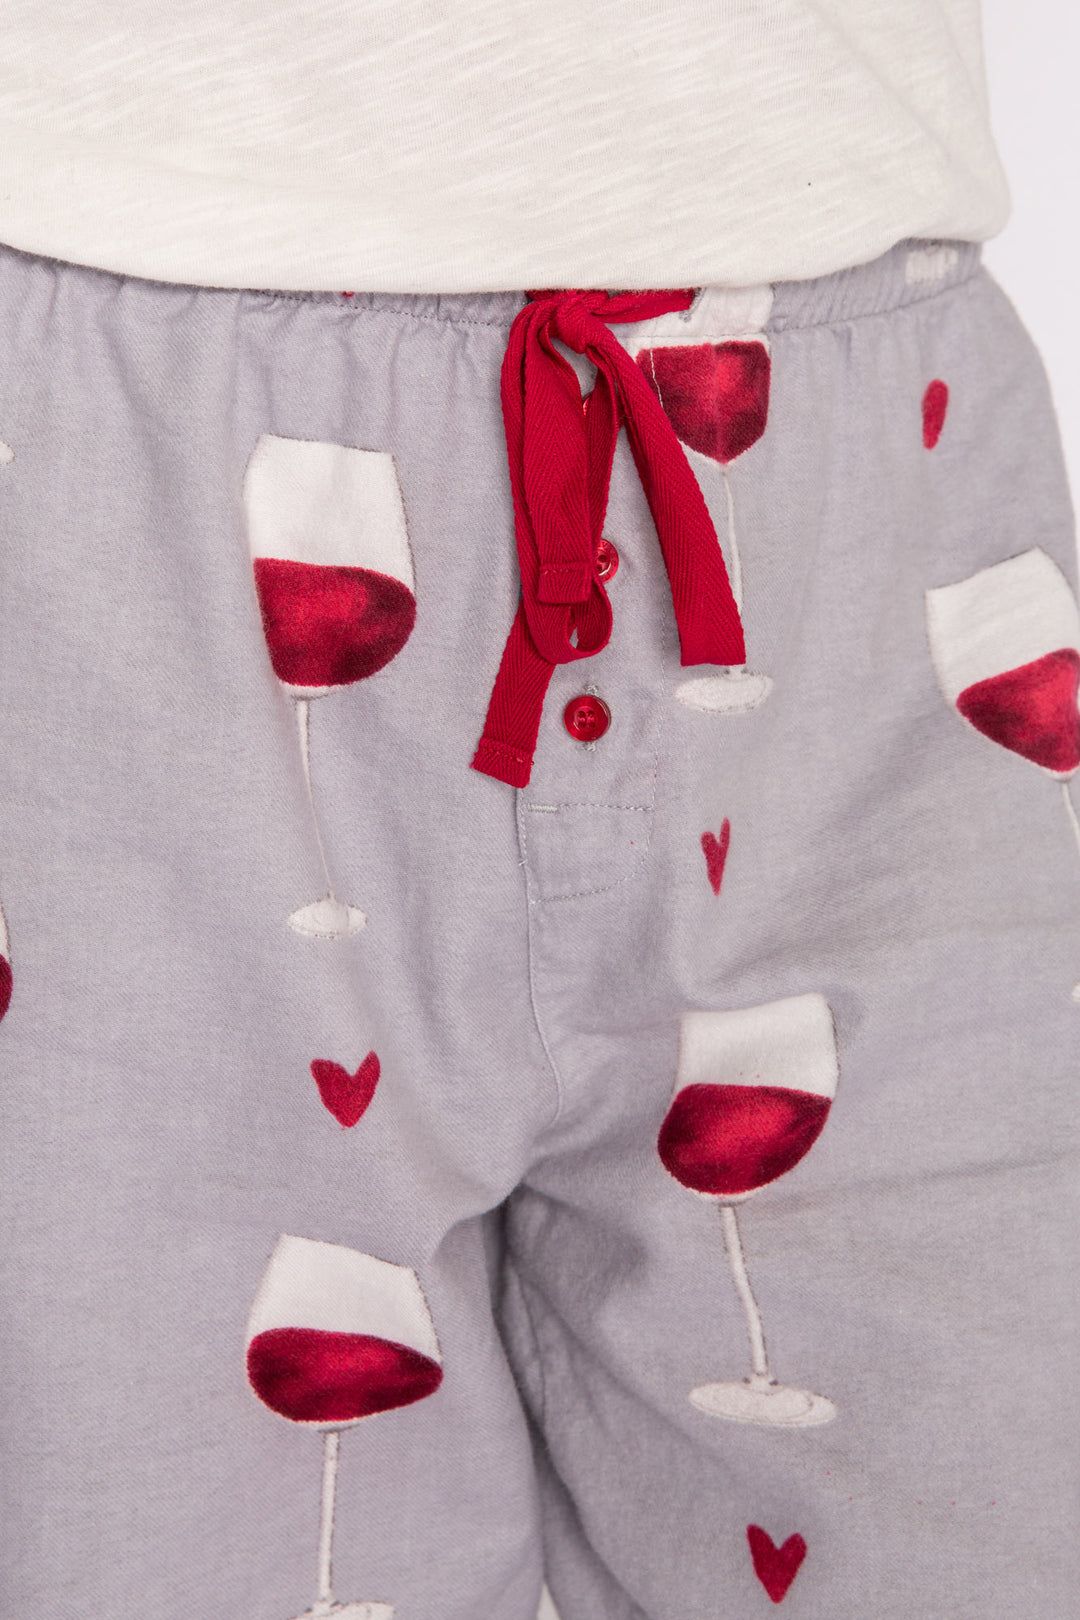 FLANNELS PANT | WINE GLASS